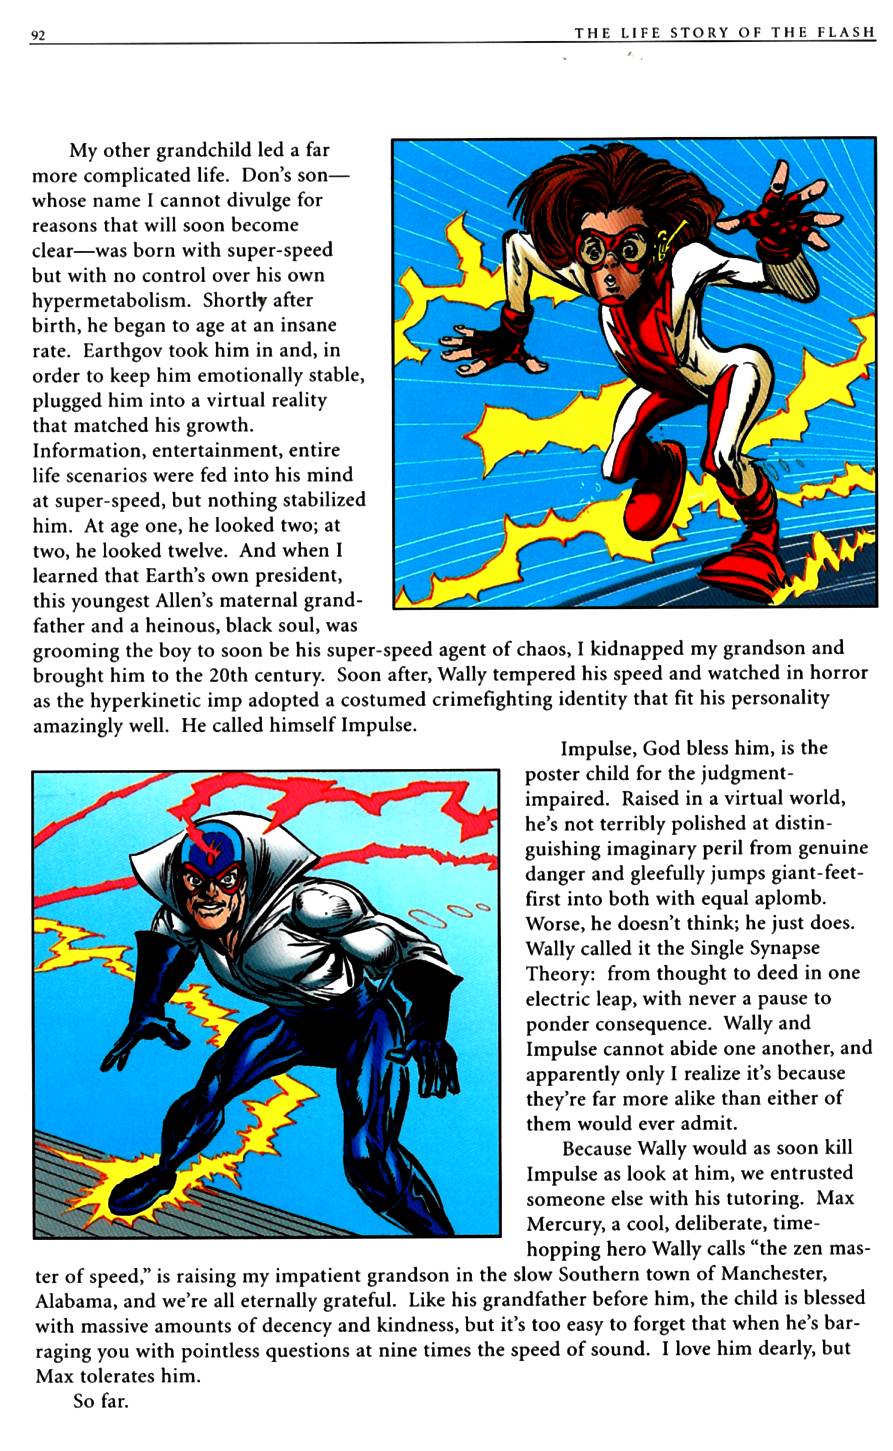 Read online The Life Story of the Flash comic -  Issue # Full - 94